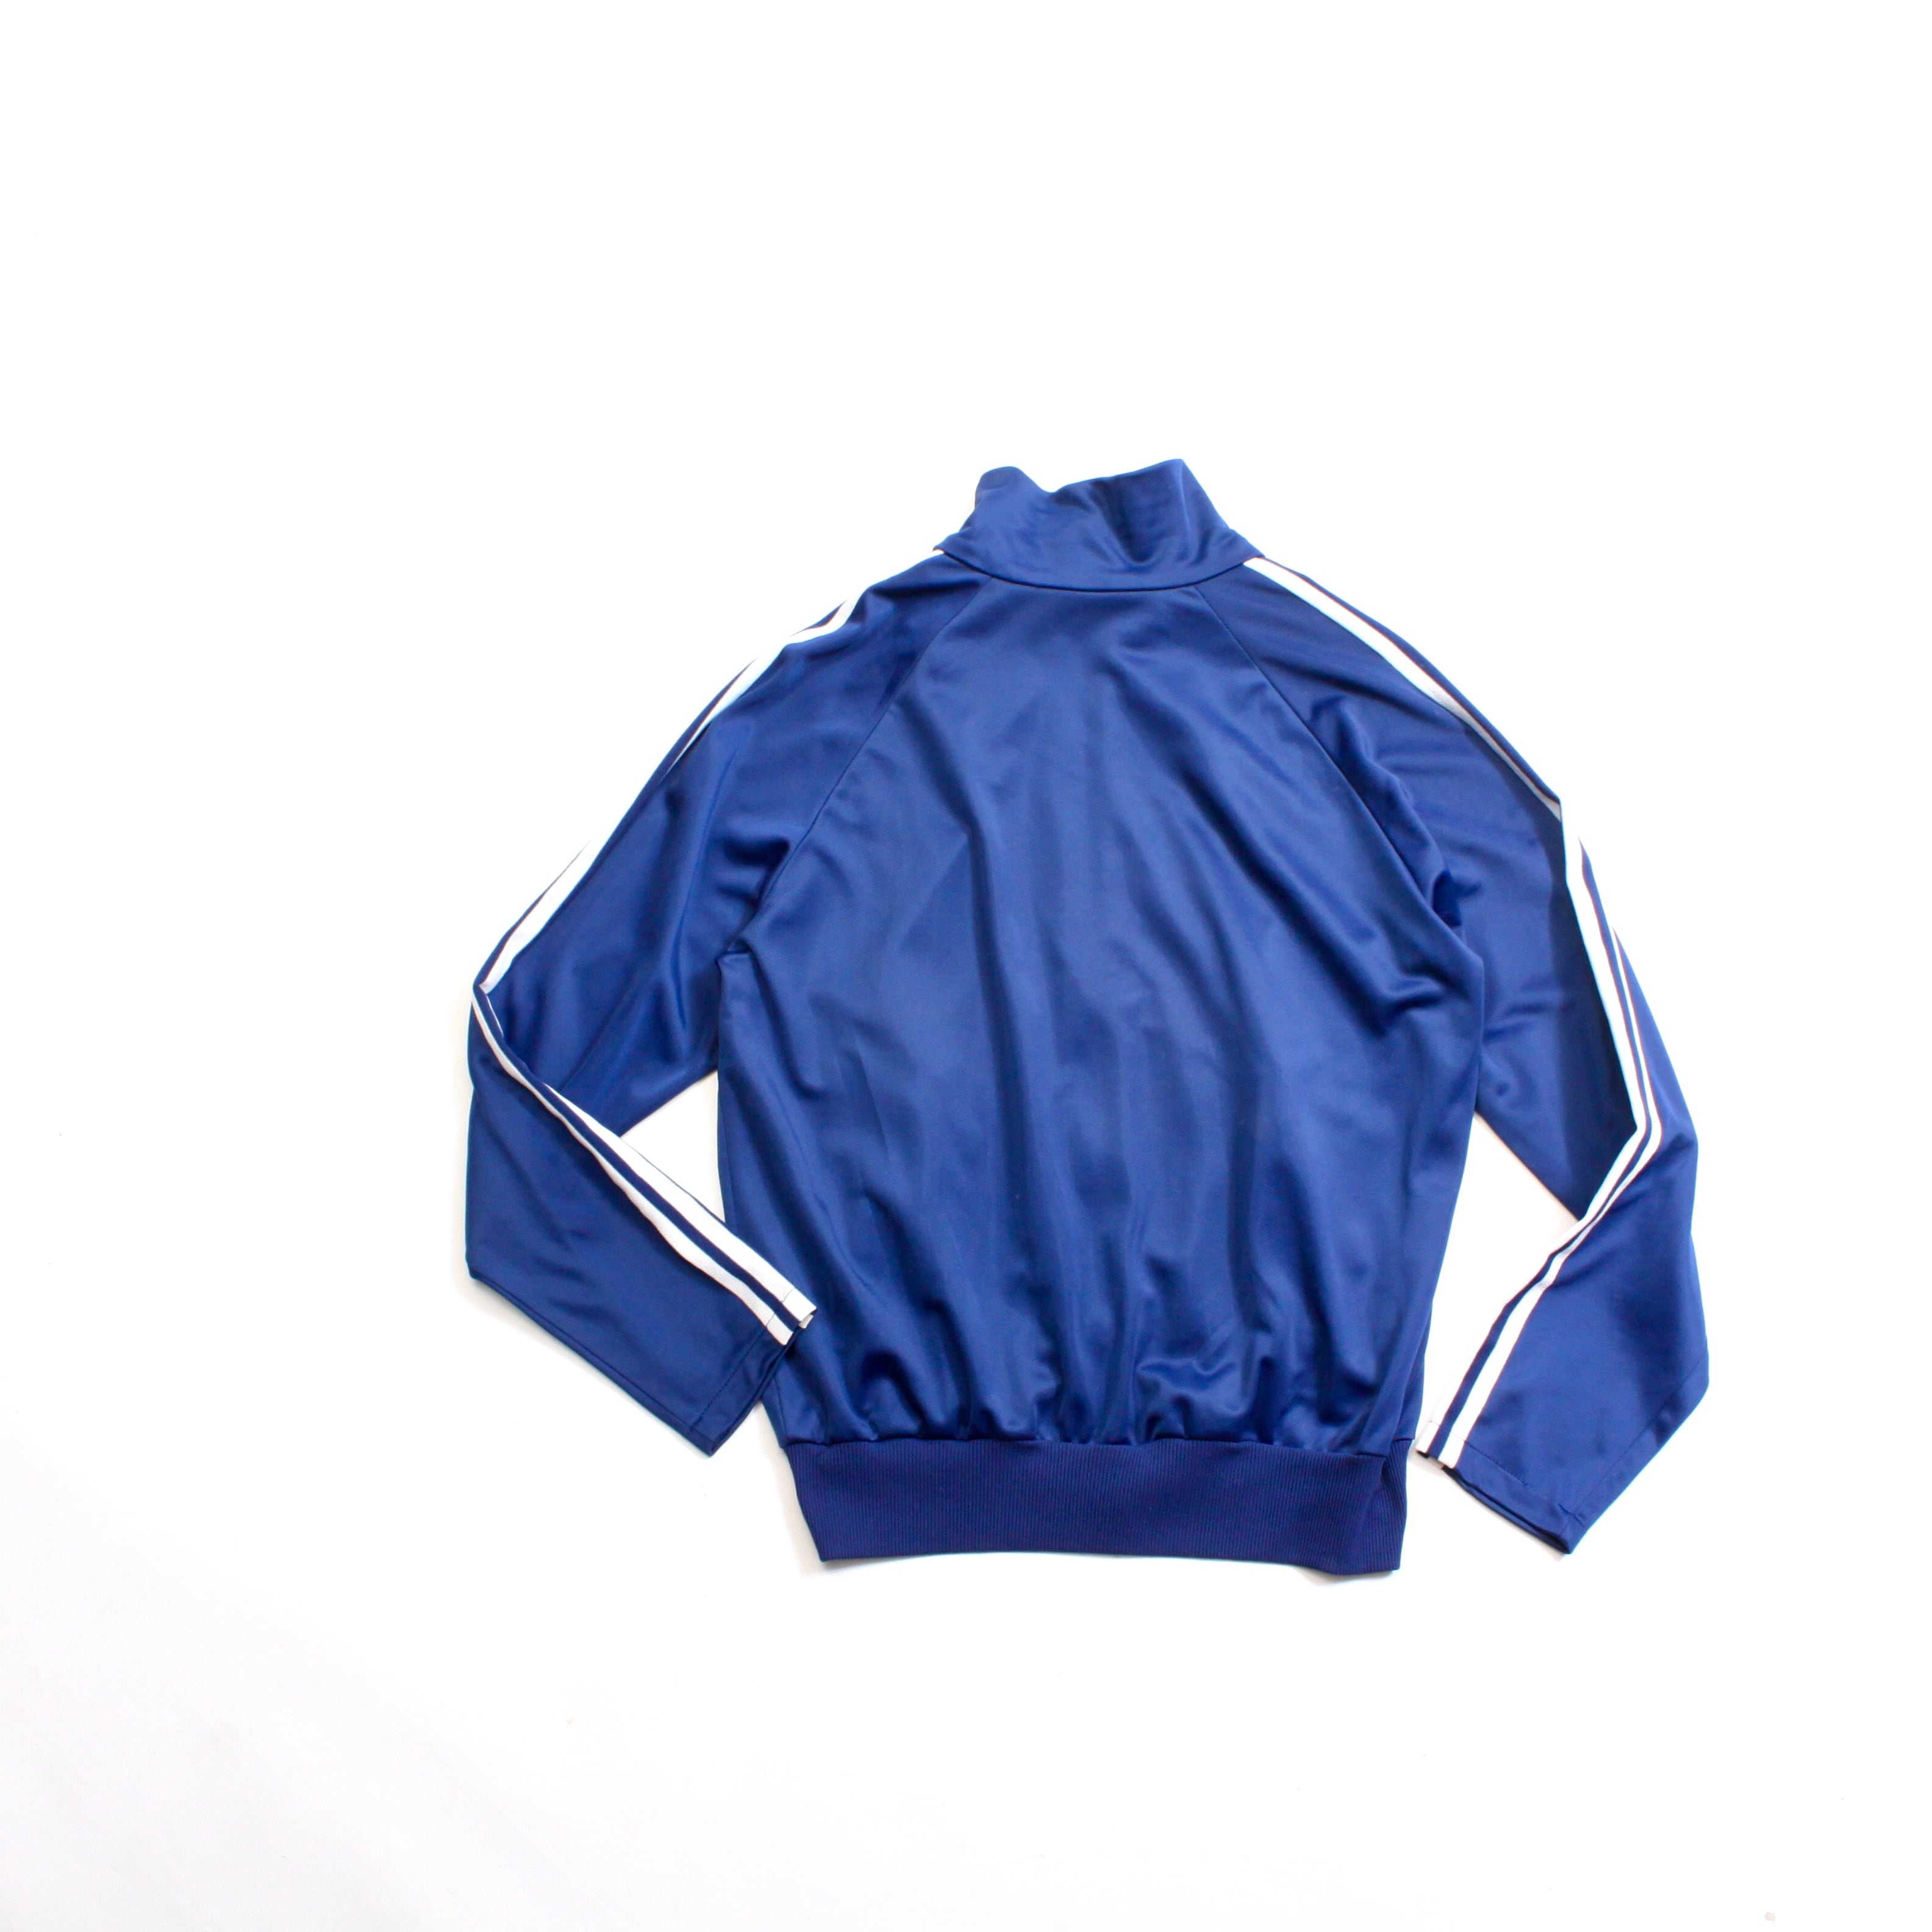 . 's adidas Jersey jog top with curving pocket made in